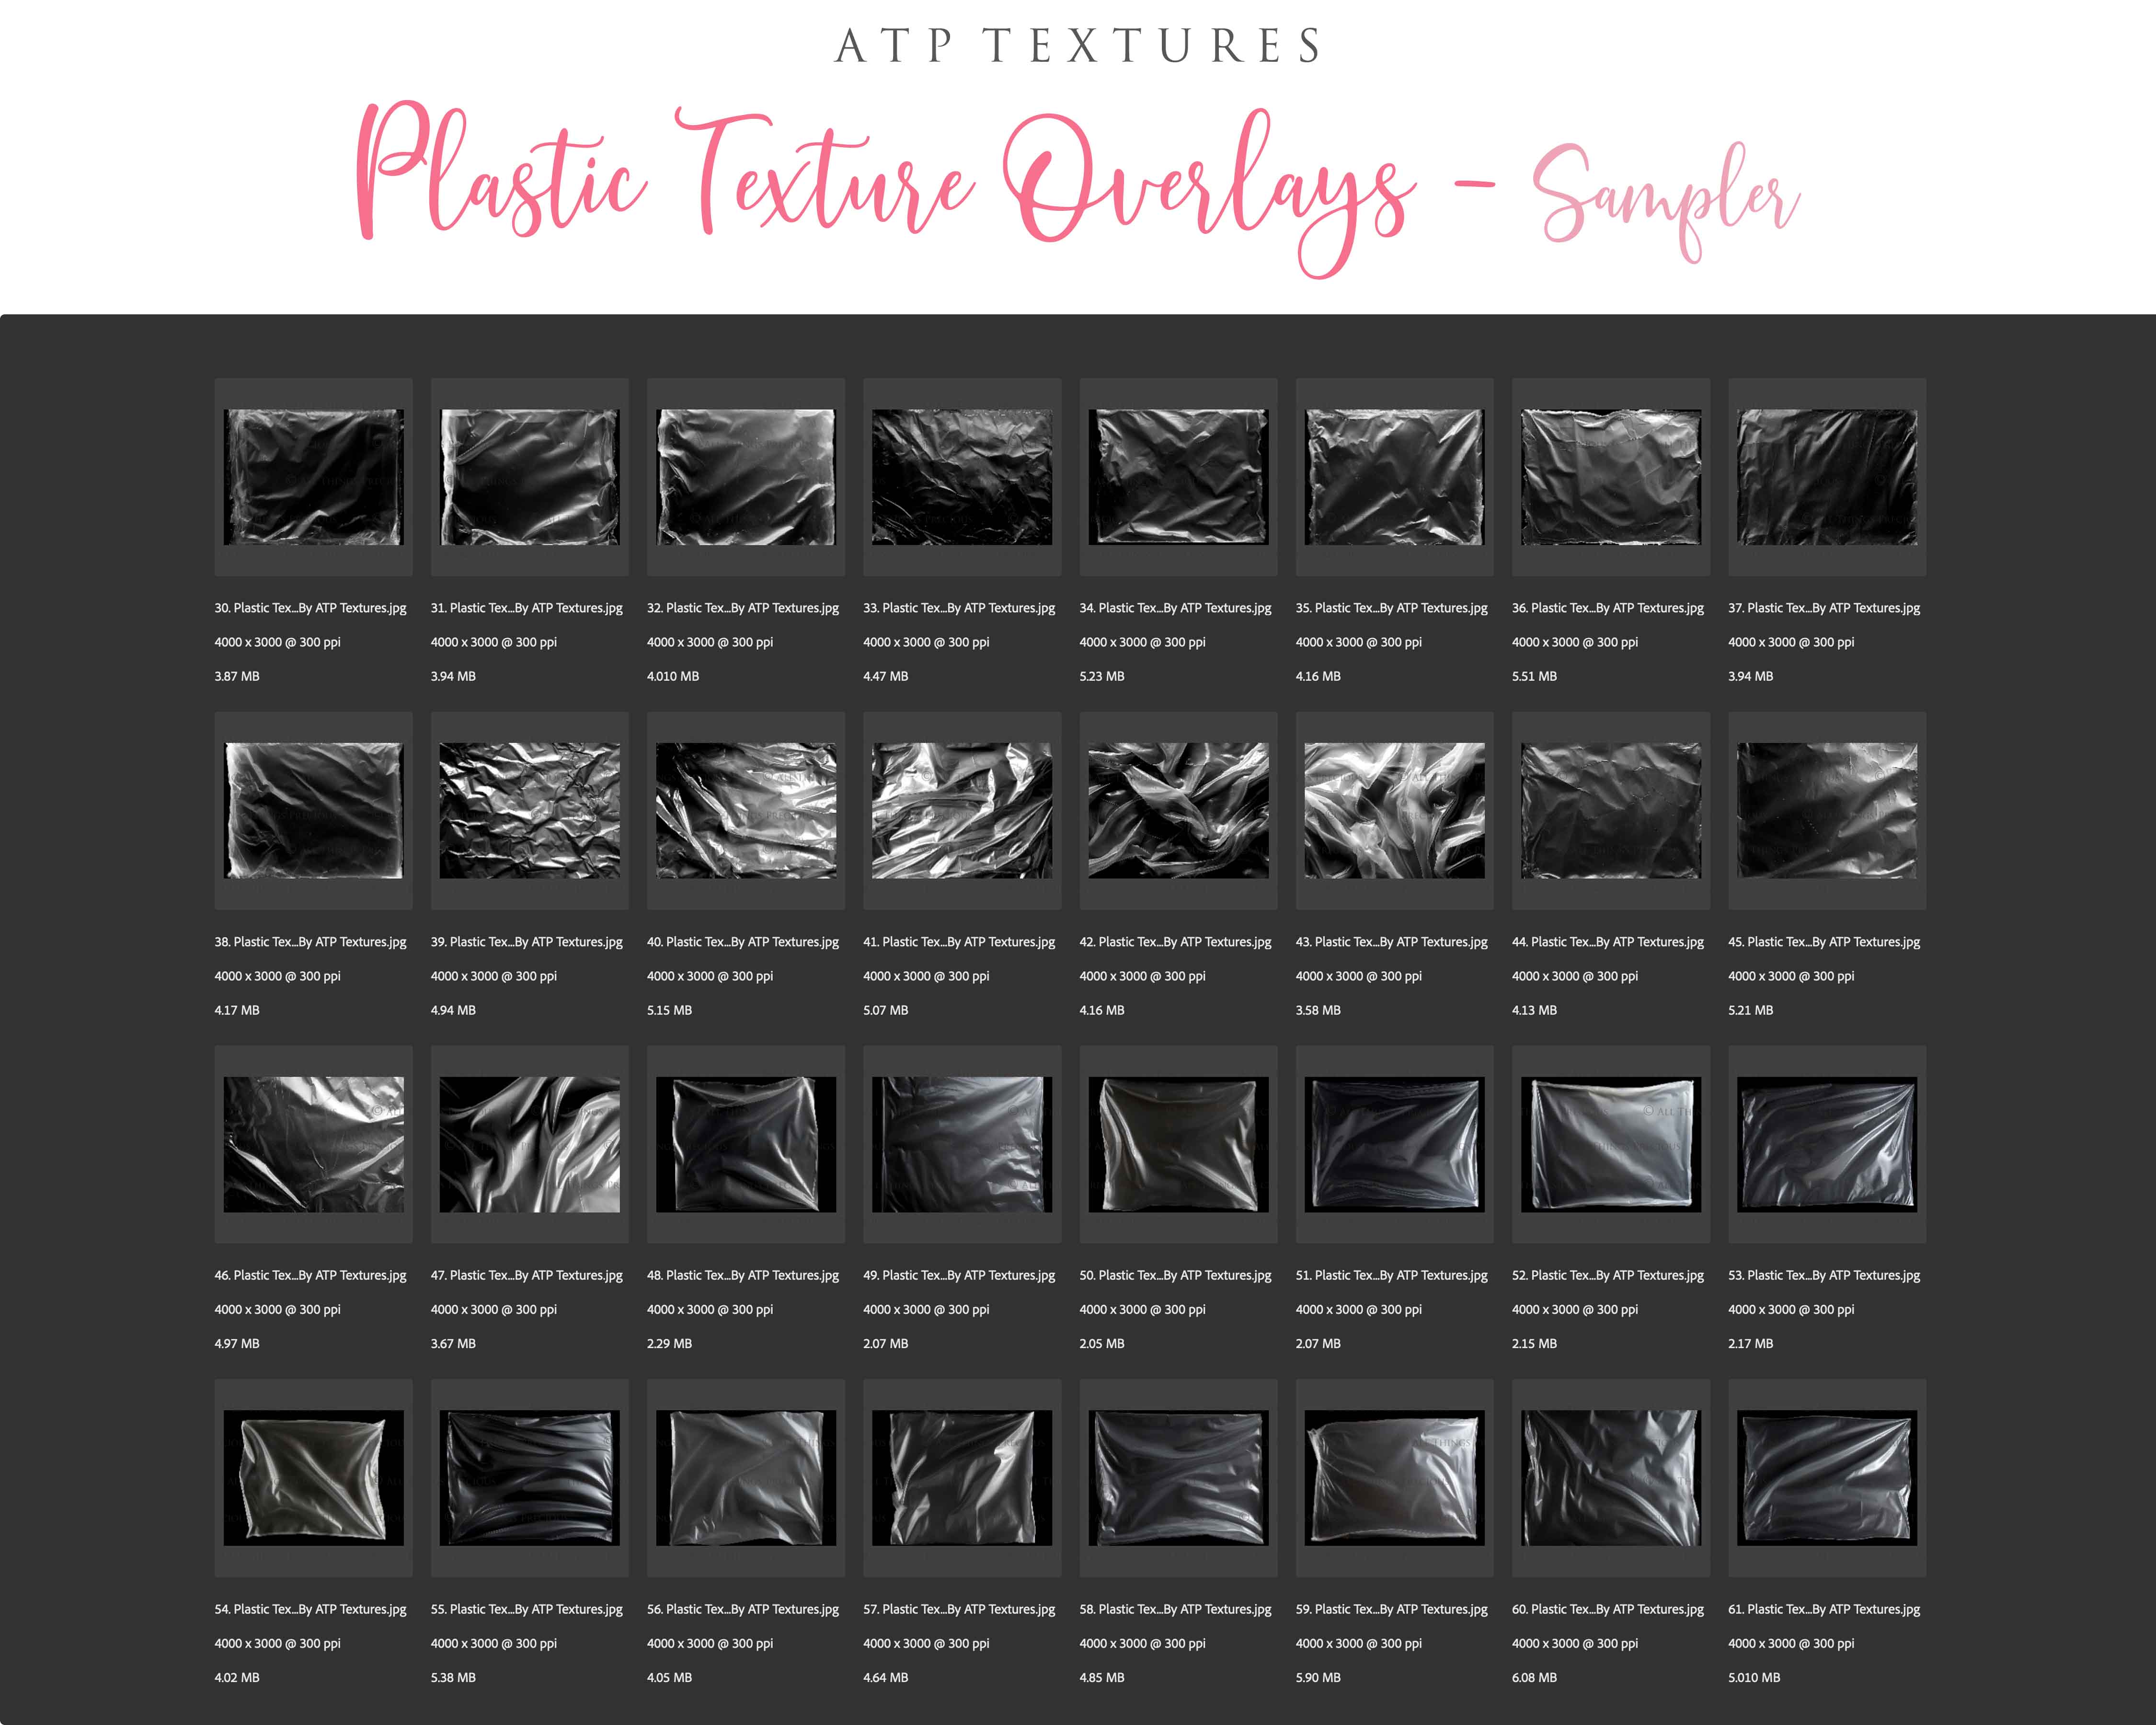 This set of Overlays & Photoshop Brushes includes JPEG Plastic Textures all different and unique with photoshop brushes. All JPEG overlays are 300dpi in high resolution. THEY ARE SUITABLE FOR FINE ART PRINTING. Digital assets for graphic art and photography.